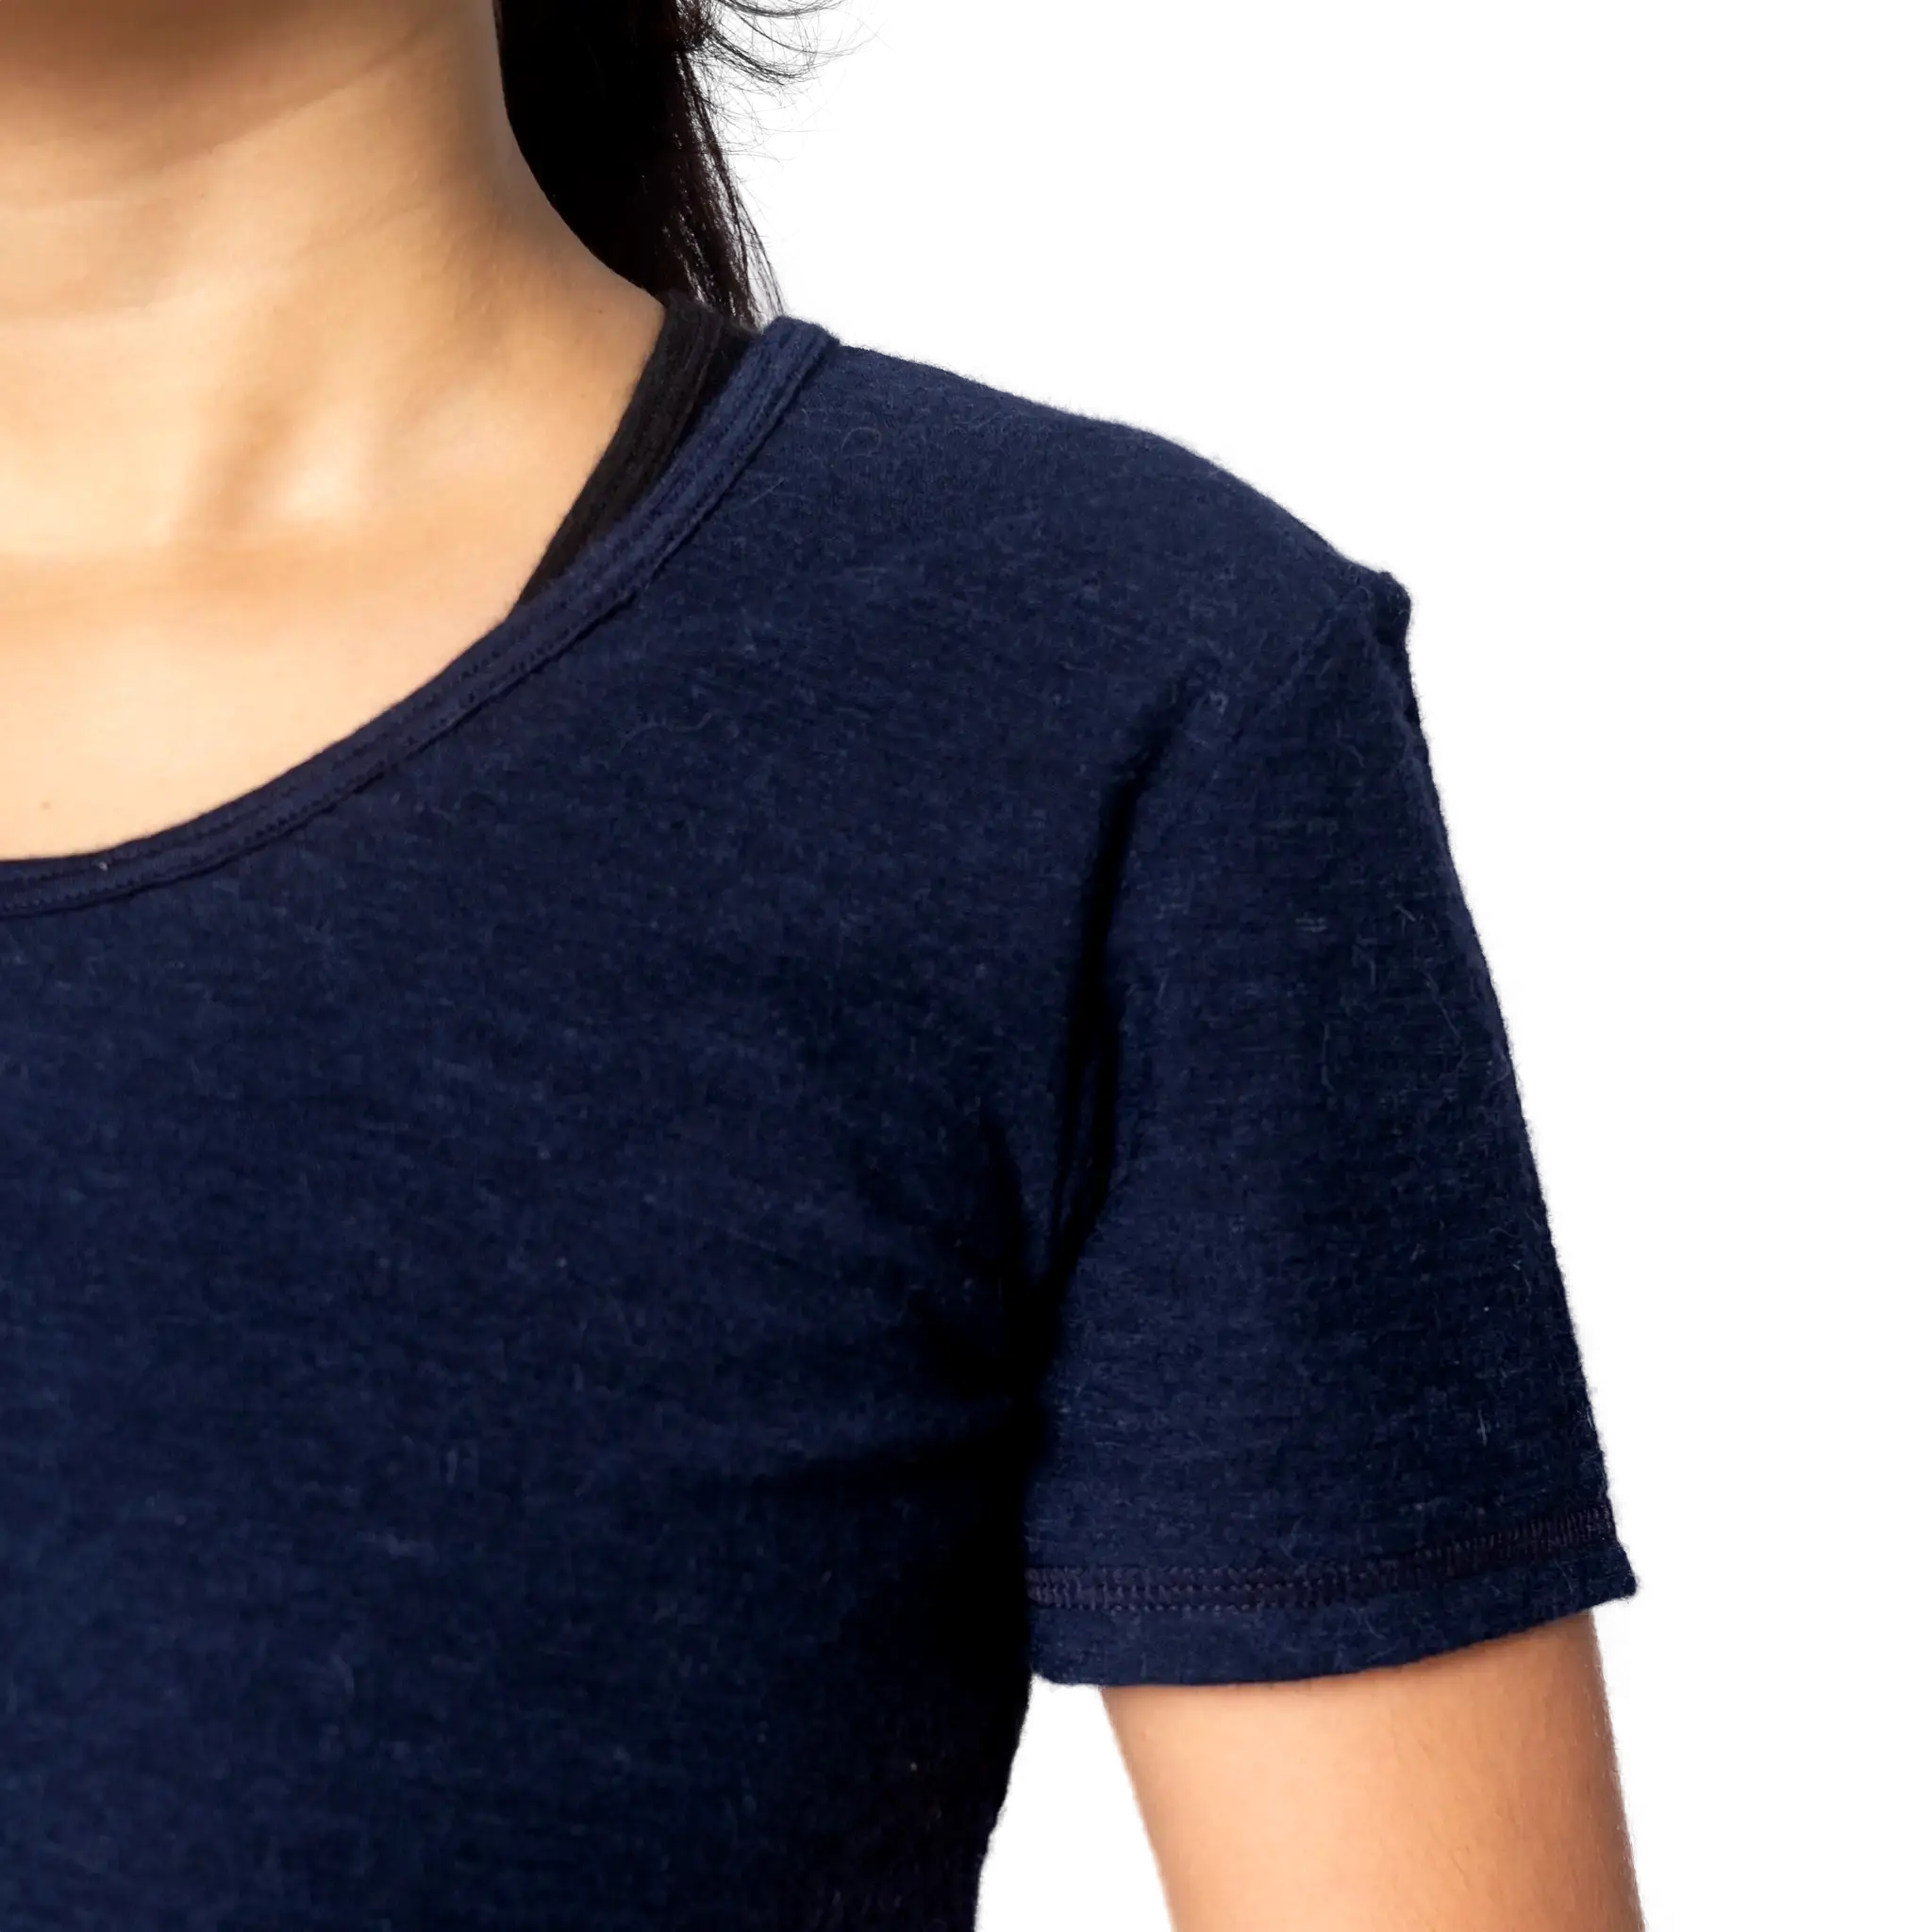 womens-crew-neck-relaxed-fit-ultra-soft-product-page.webp__PID:bdd4d4d6-2e16-4c5b-97ca-d90fe575cc76